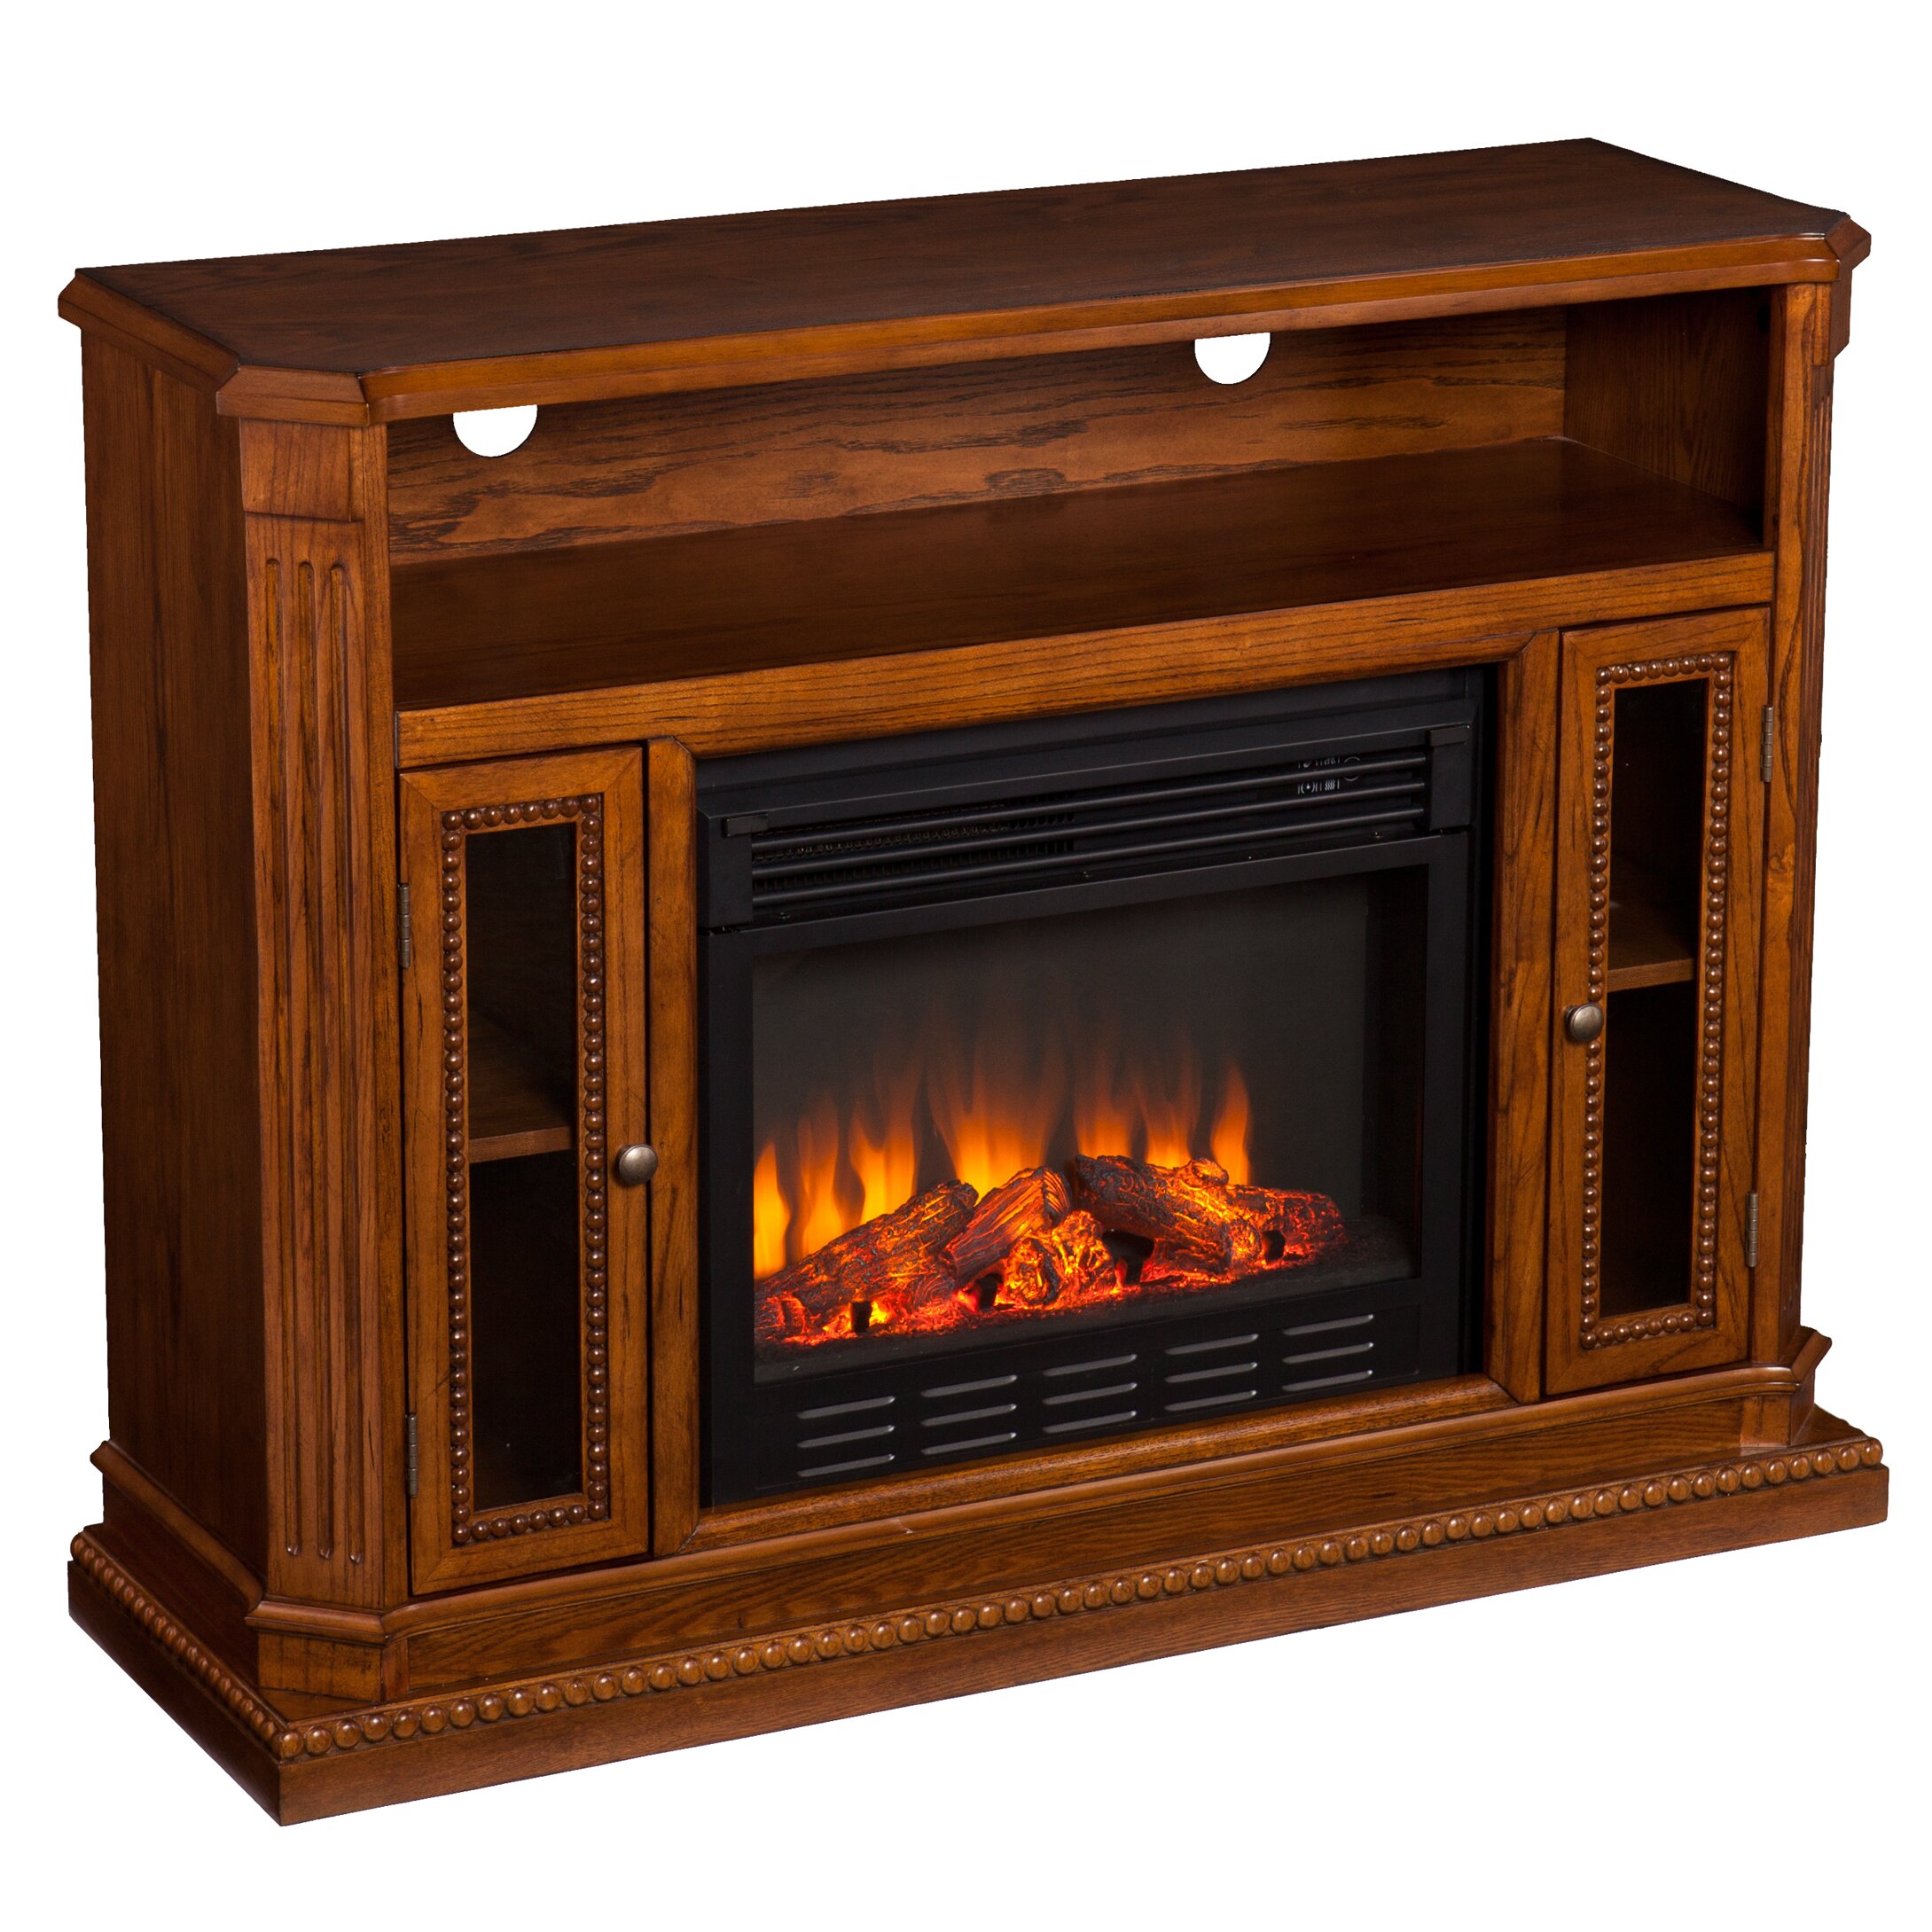 Wildon Home ® Delaney TV Stand with Electric Fireplace  Reviews  Wayfair